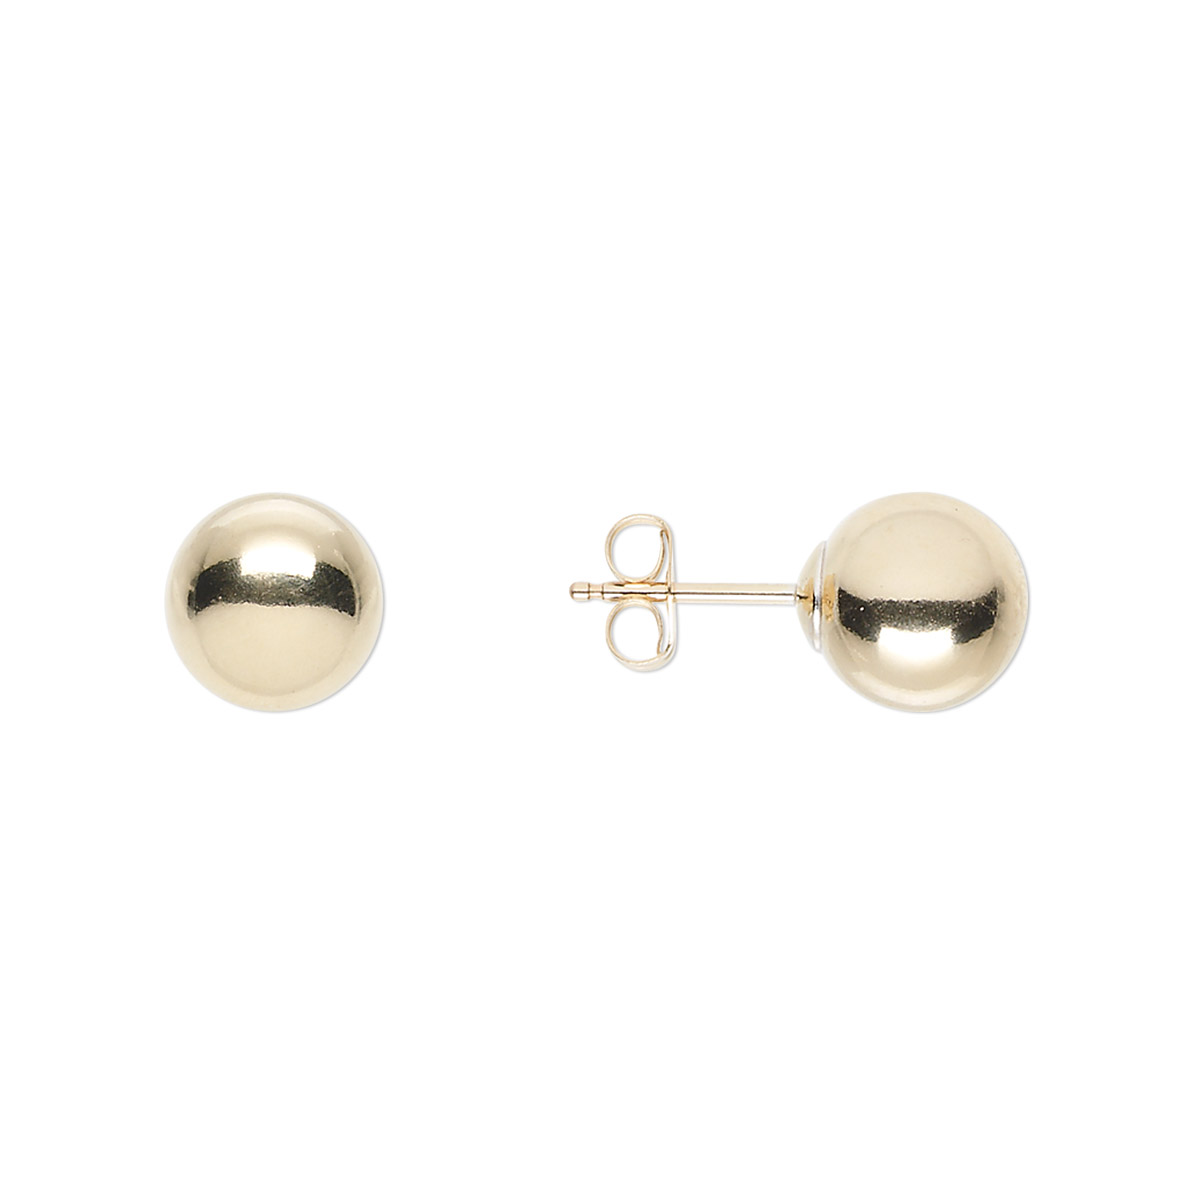 Earstud, 14Kt gold-filled, 8mm ball with post. Sold per pair. - Fire ...